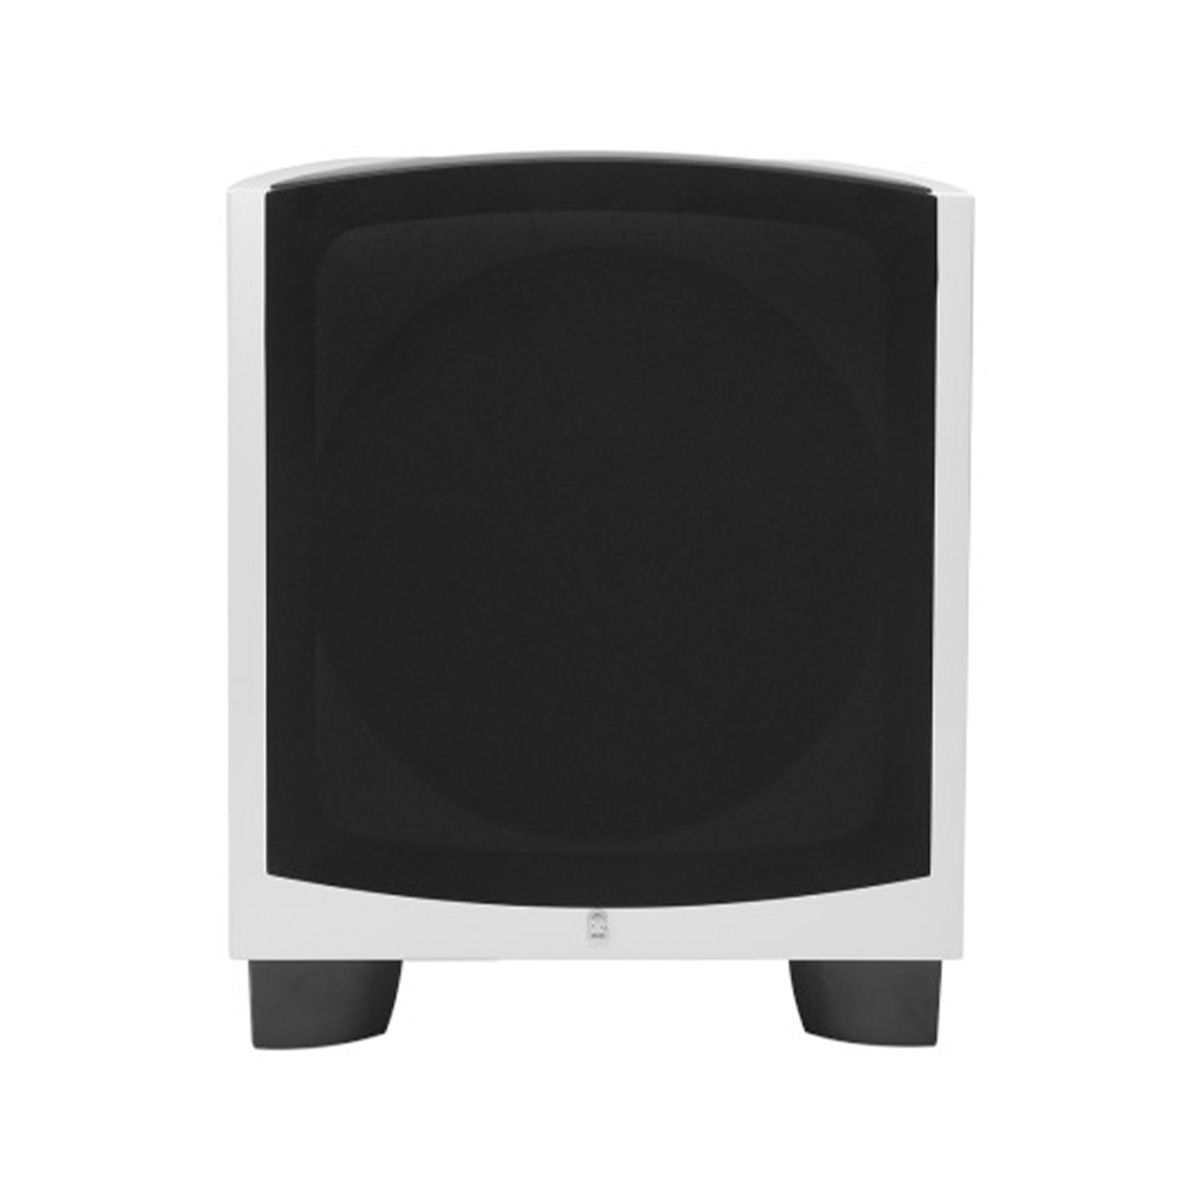 Revel B112v2 12” 1000W Powered Subwoofer - white single with grille - front view